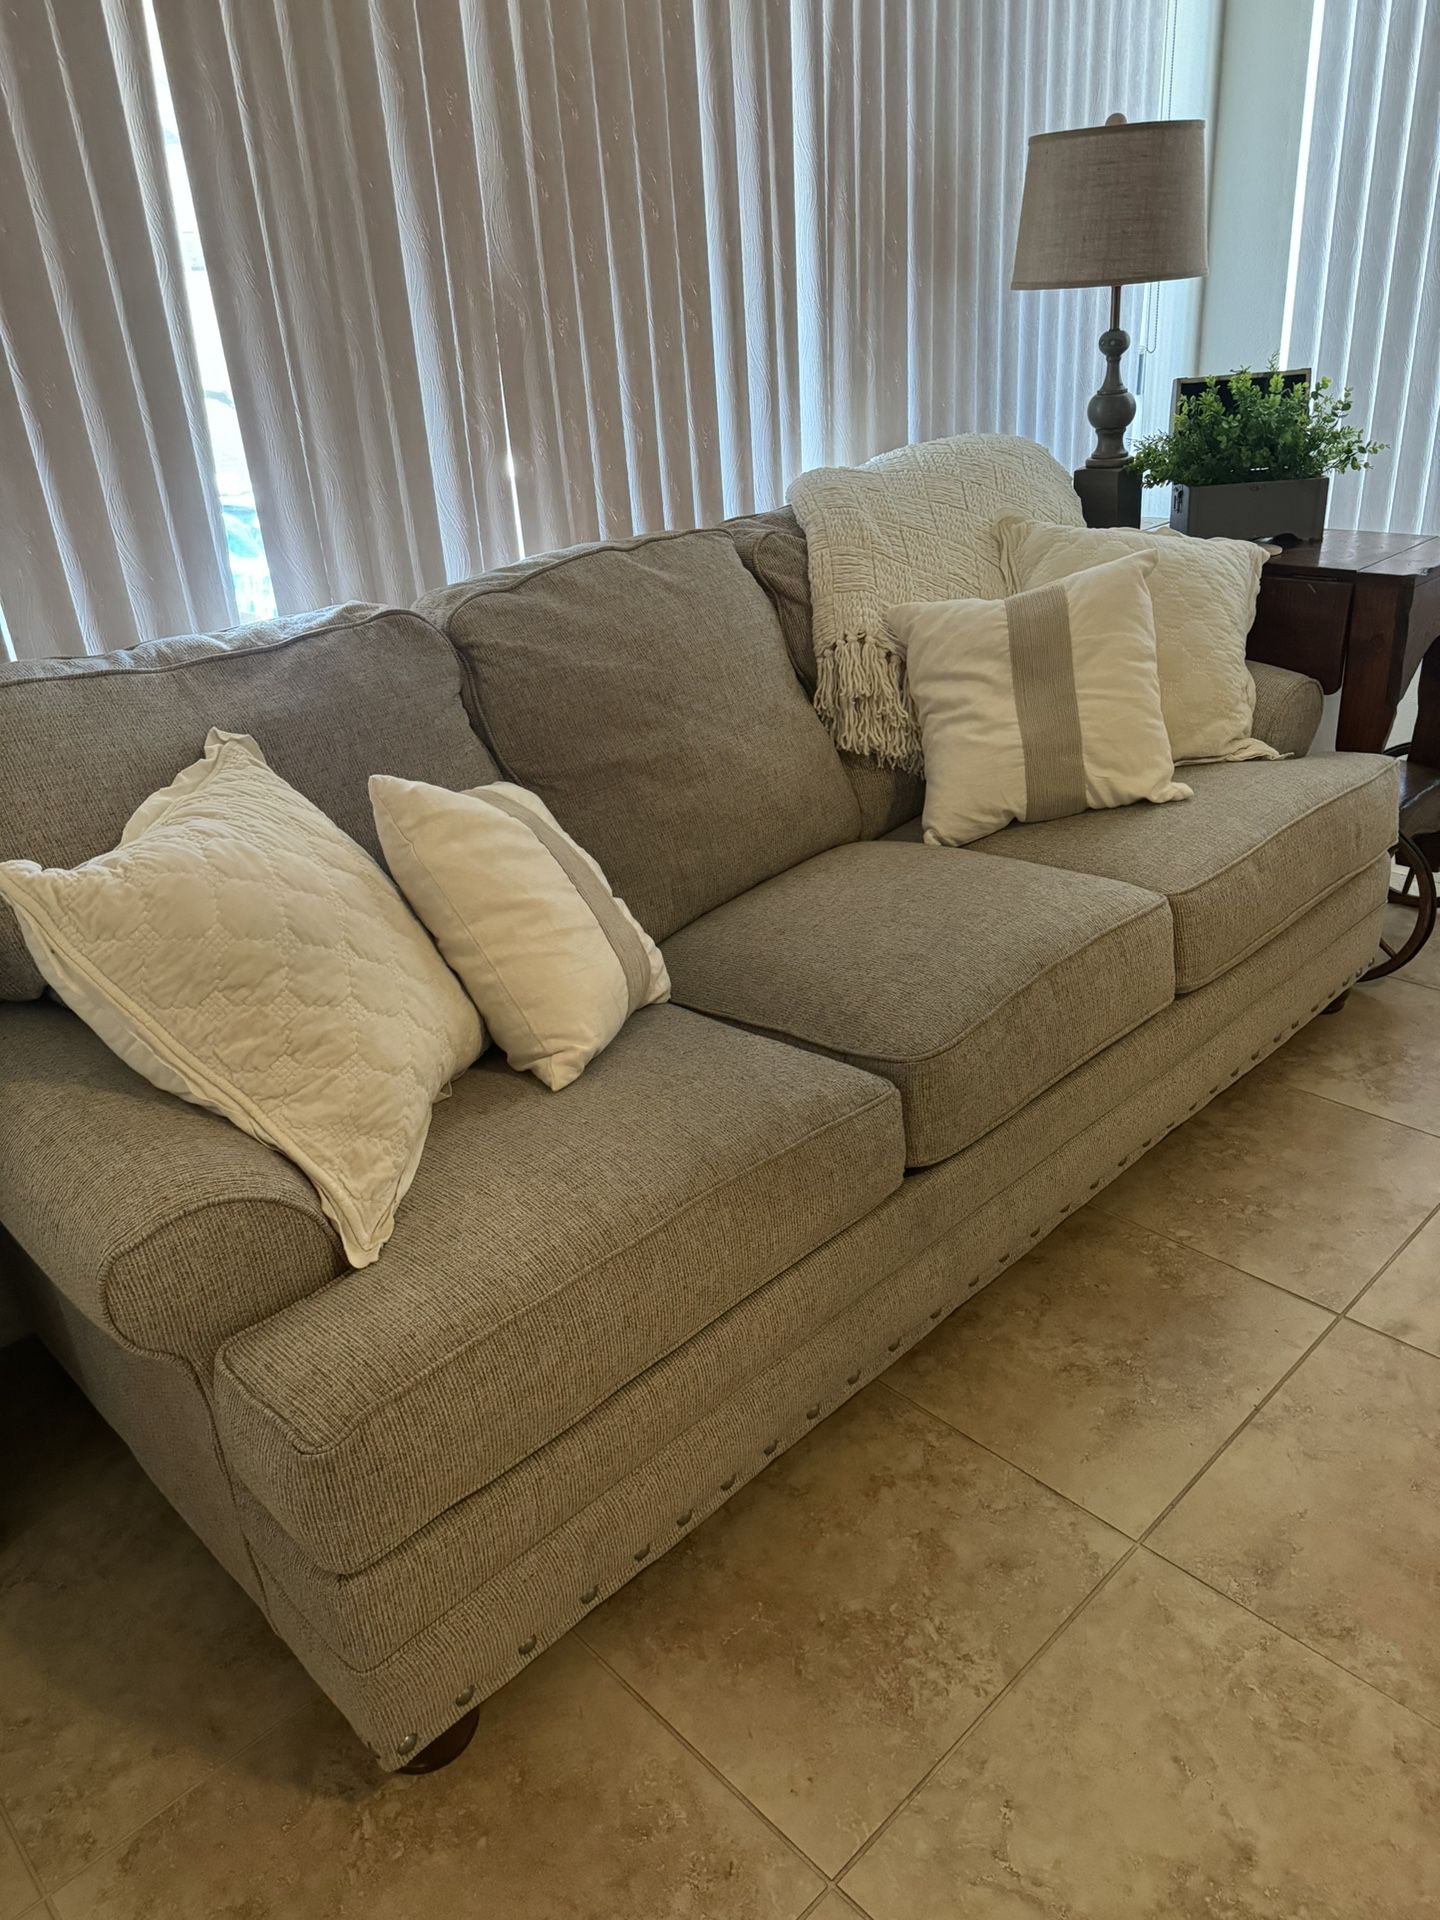 Great Beige / Grey Sofa / Couch